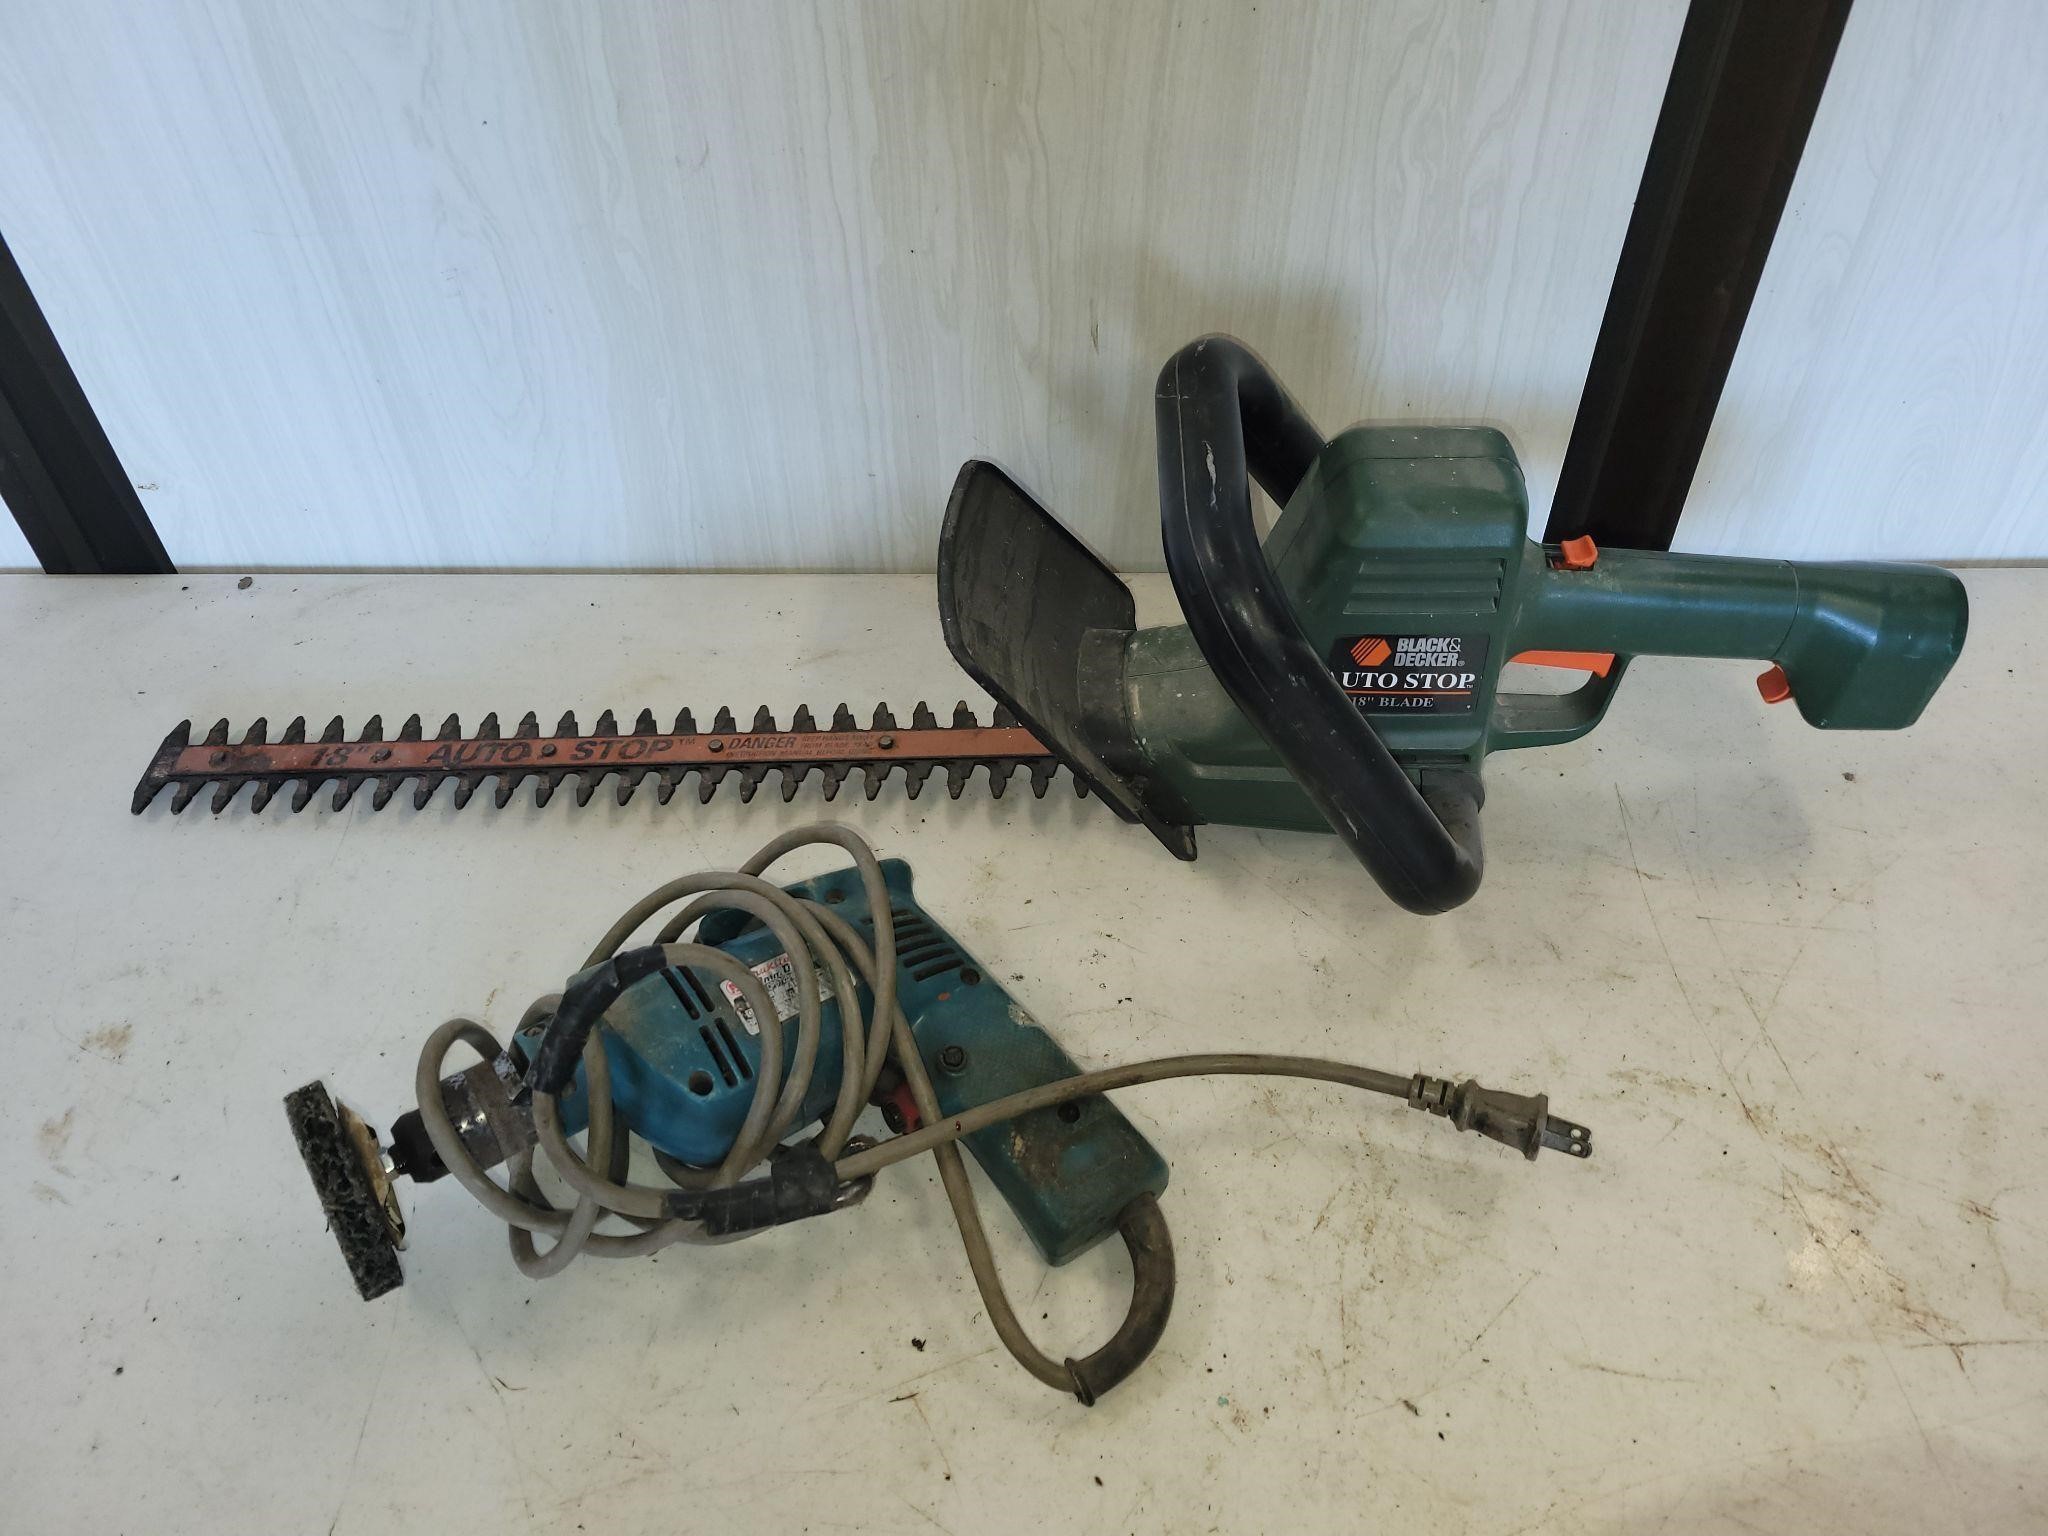 Black and decker hedge trimmer and makita drill